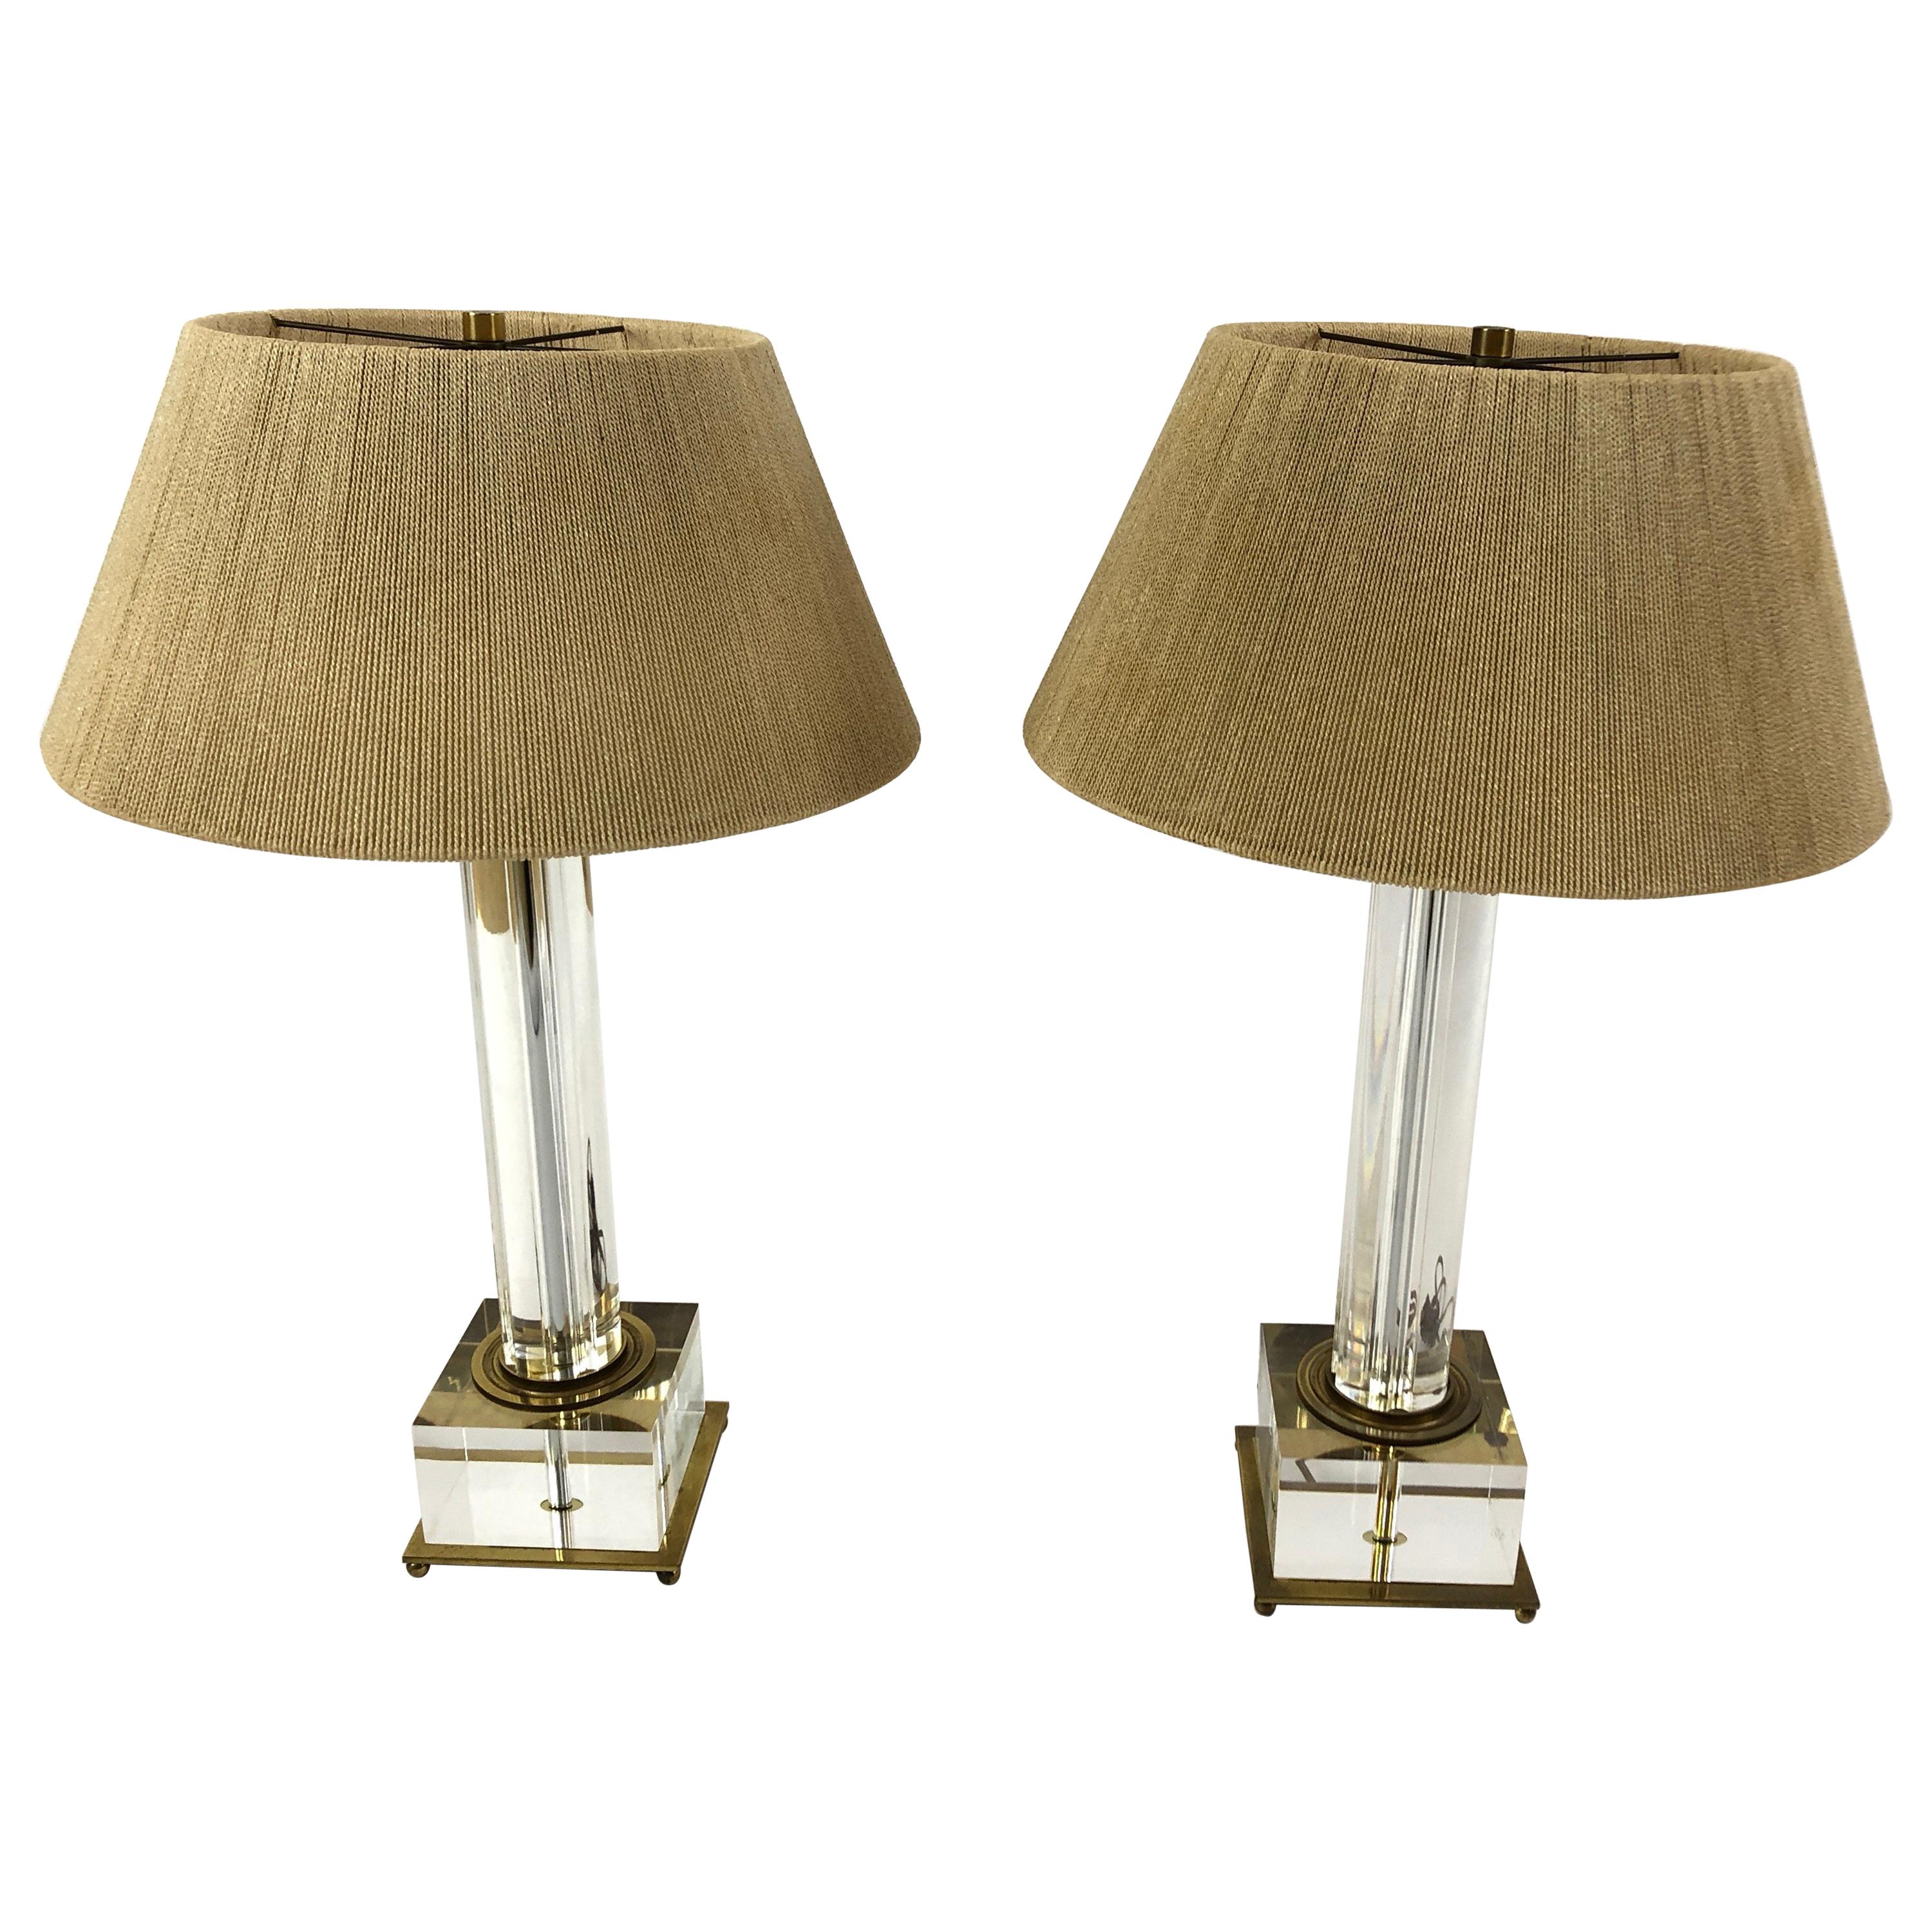 Sensational Pair of Mid-Century Modern Lucite and Brass Lamps